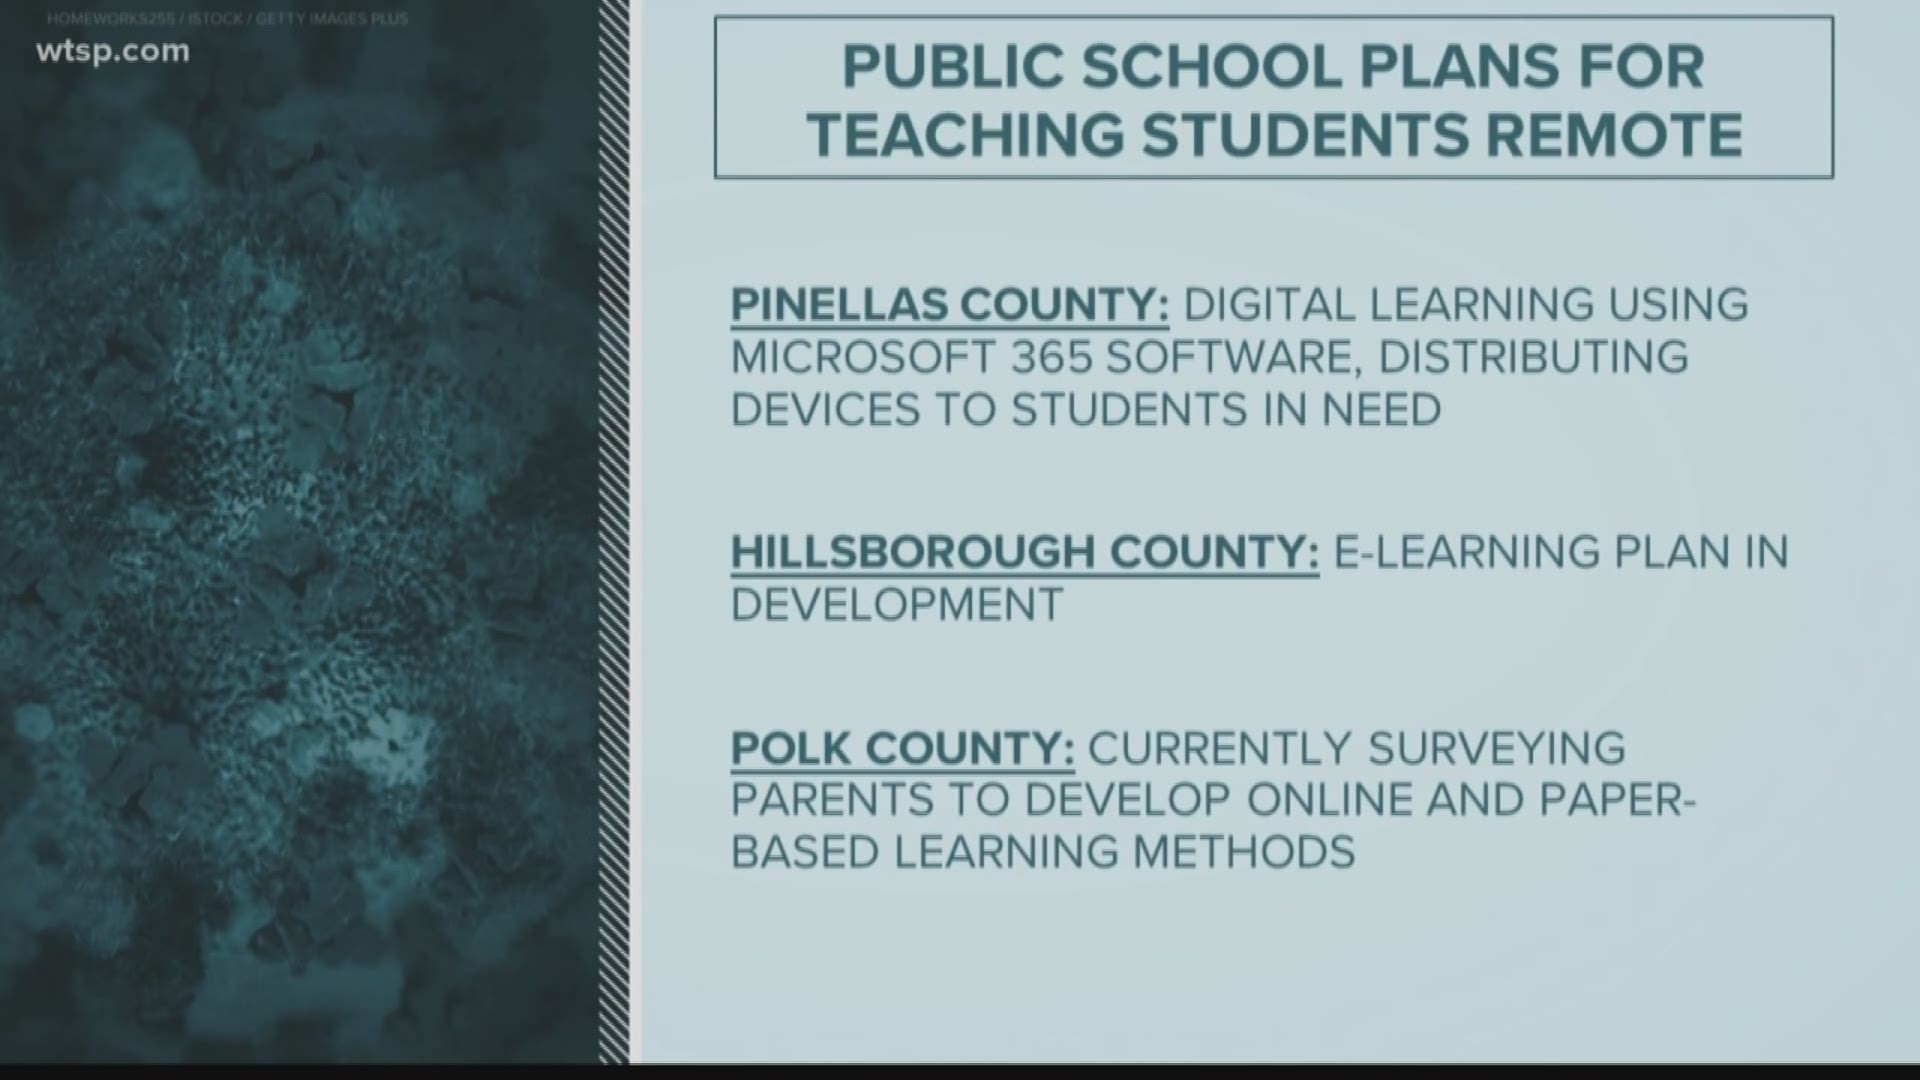 School across the Tampa Bay area worked to get their e-learning plans out before the end of spring break.